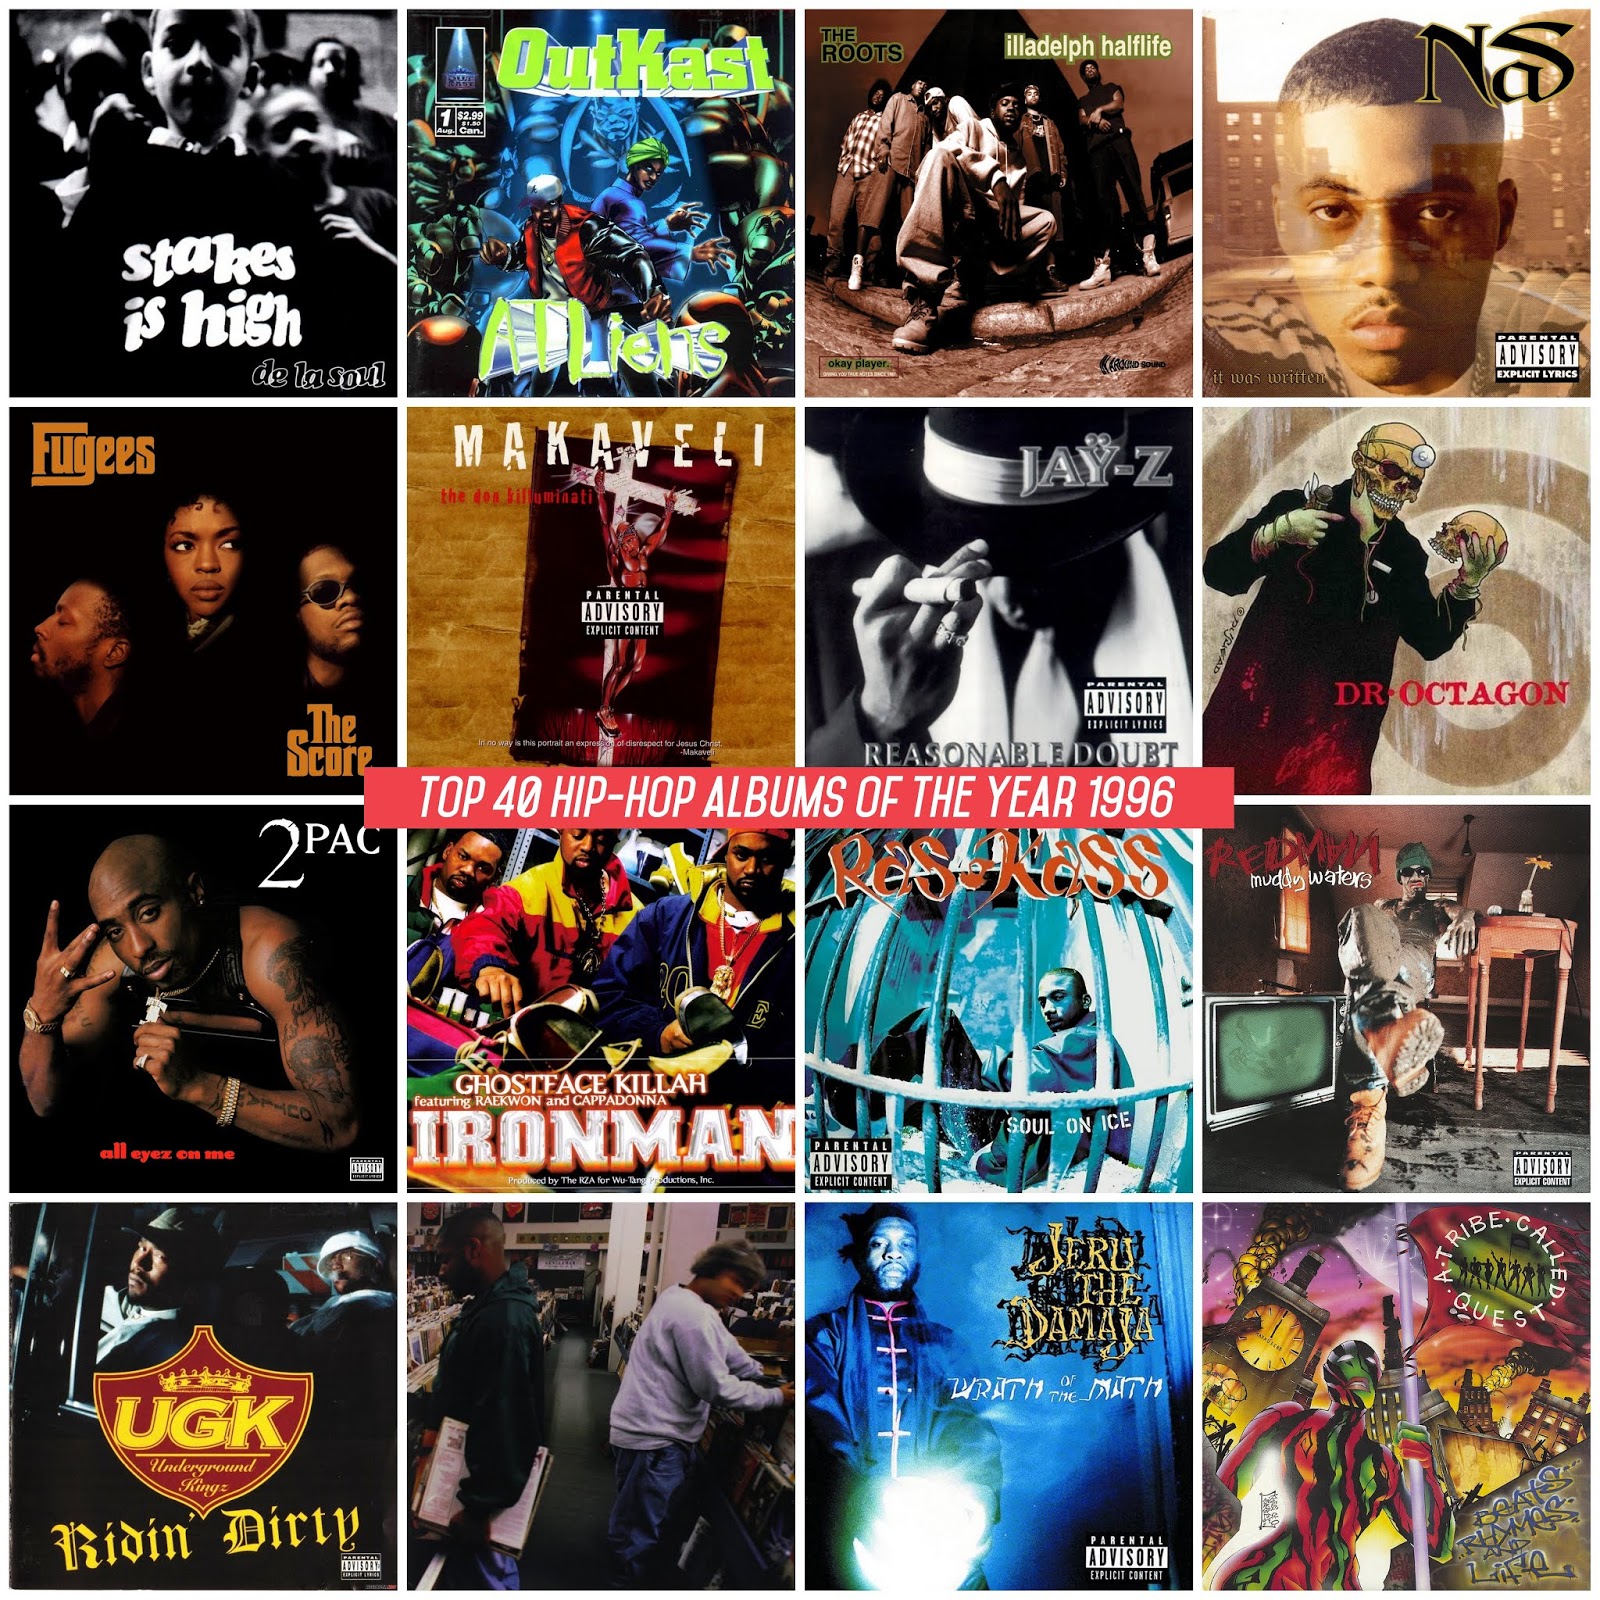 Top 40 Hip Hop Albums Of The Year 1996 Mediafire Mega 3 Kbps Producto Ilicito